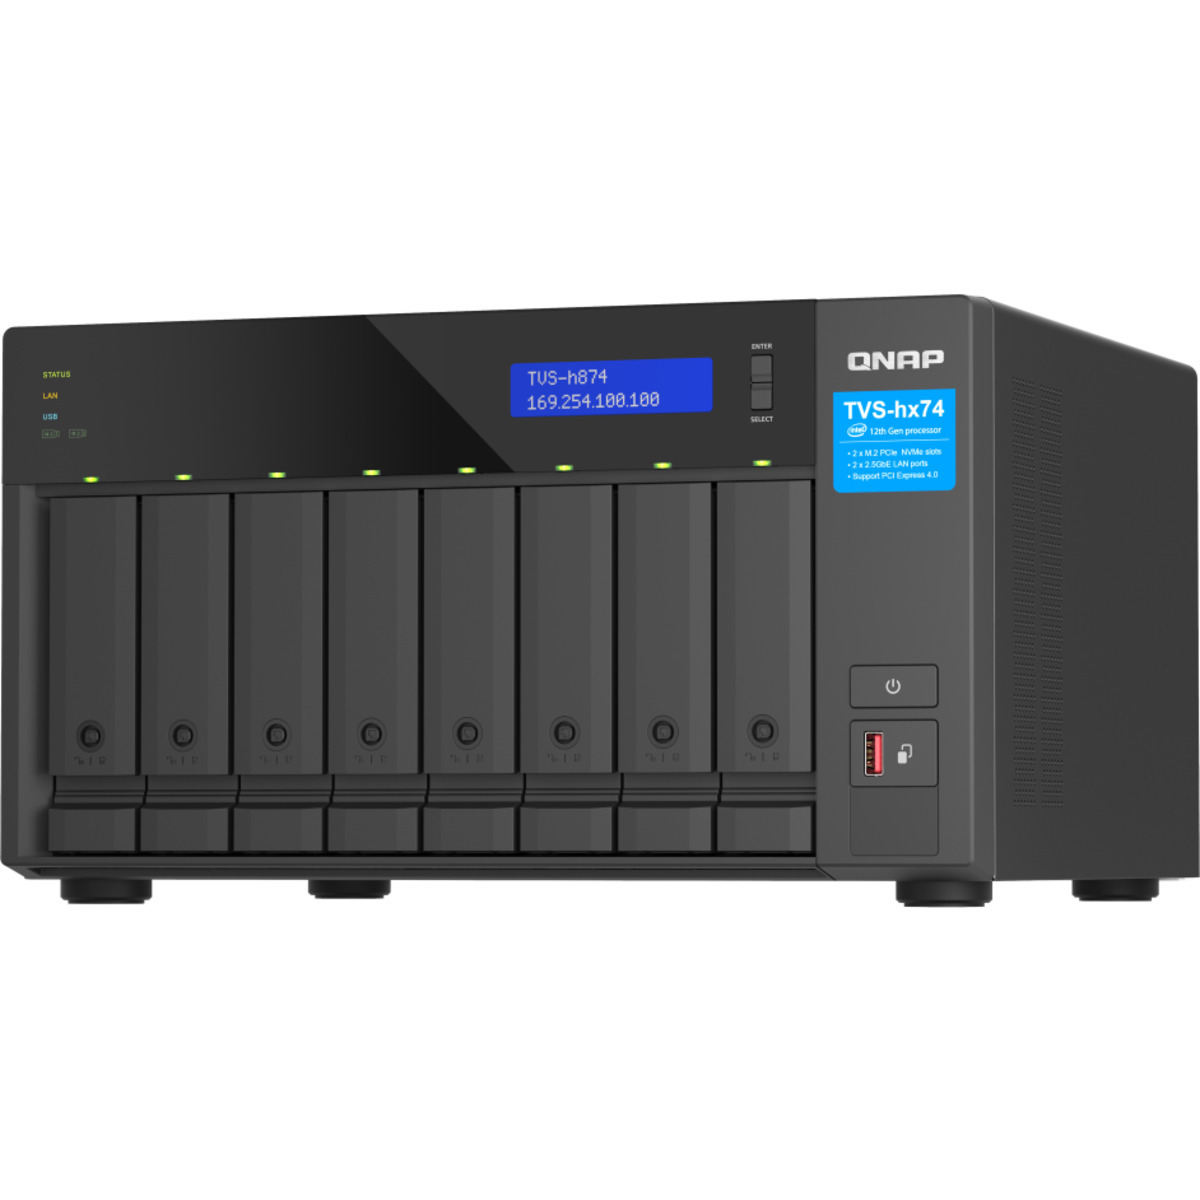 QNAP TVS-h874 Core i5 84tb 8-Bay Desktop Multimedia / Power User / Business NAS - Network Attached Storage Device 6x14tb Seagate EXOS X18 ST14000NM000J 3.5 7200rpm SATA 6Gb/s HDD ENTERPRISE Class Drives Installed - Burn-In Tested TVS-h874 Core i5